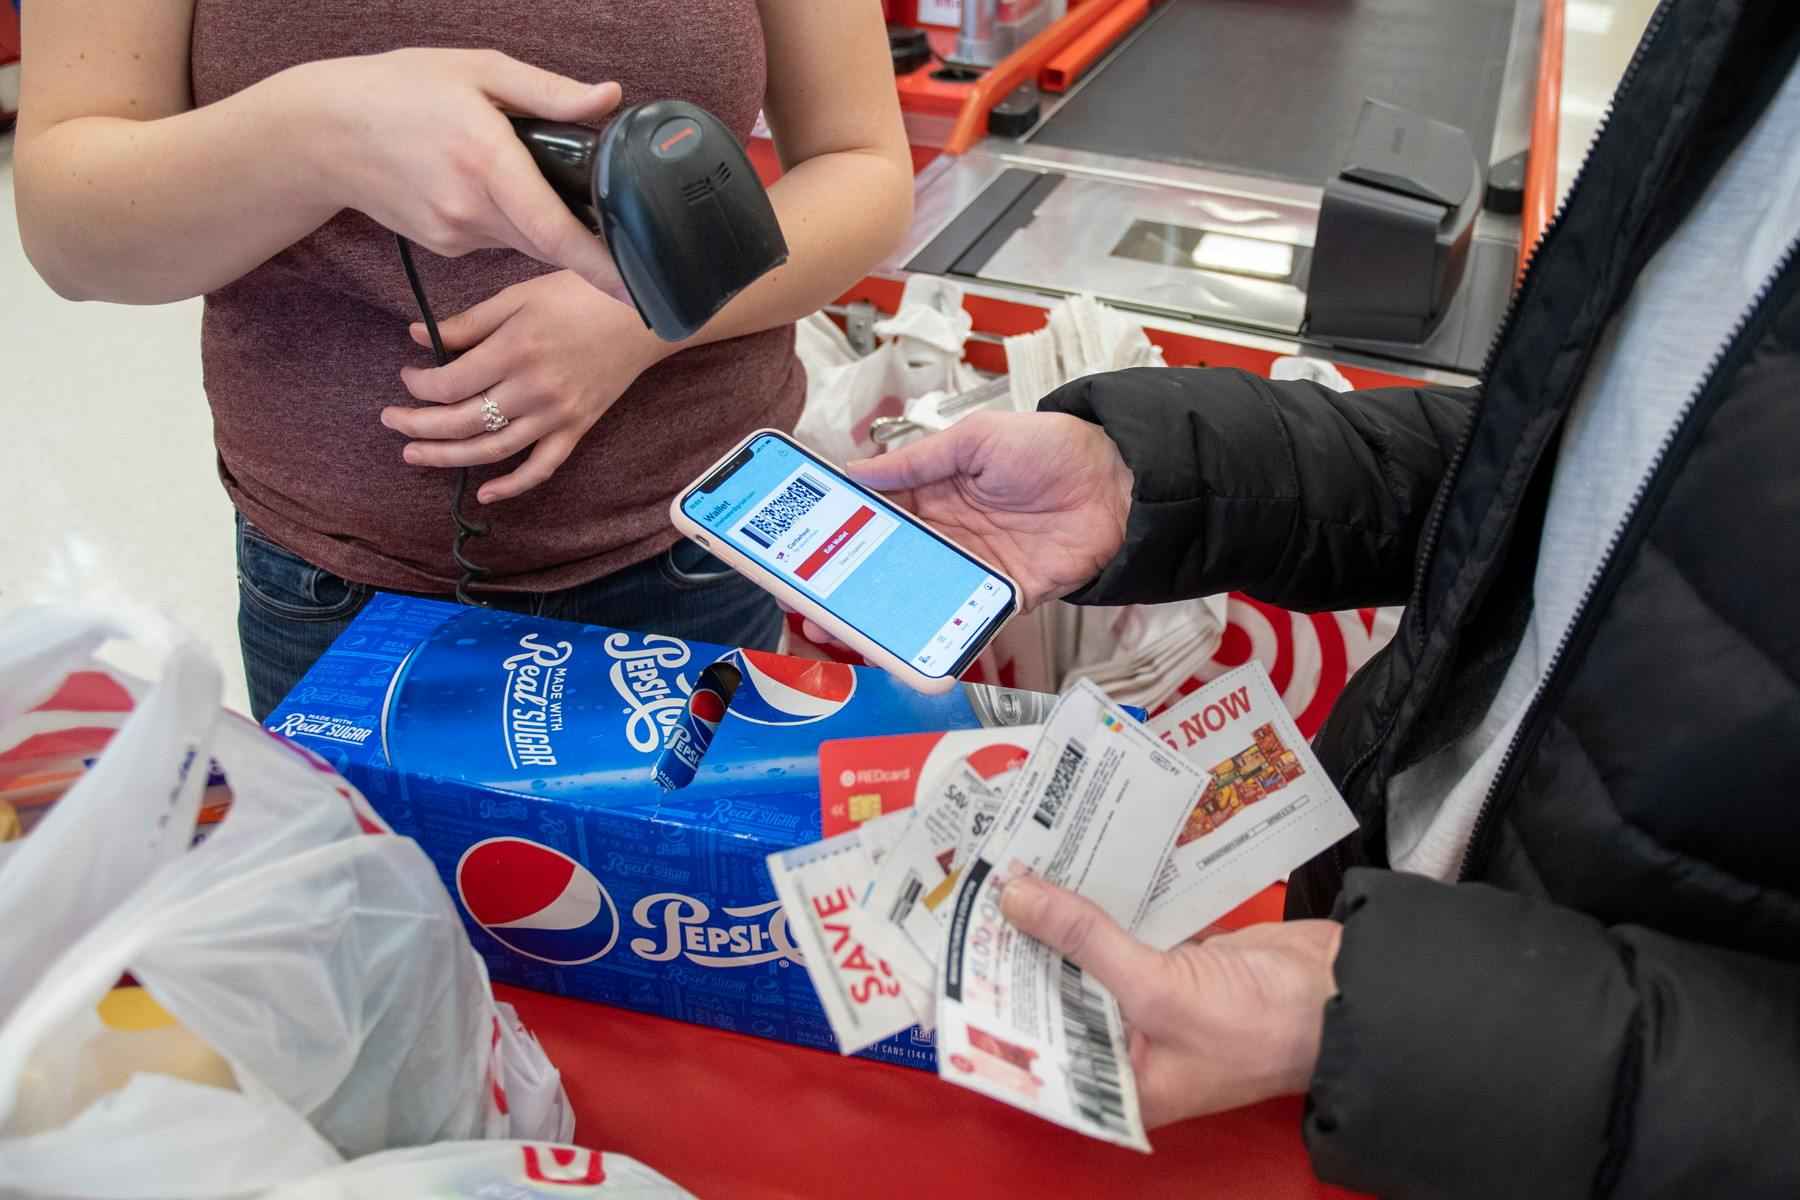 A person standing at the Target checkout, holding up their phone displaying their Target app barcode, and another person using the hand scanner to scan the phone.